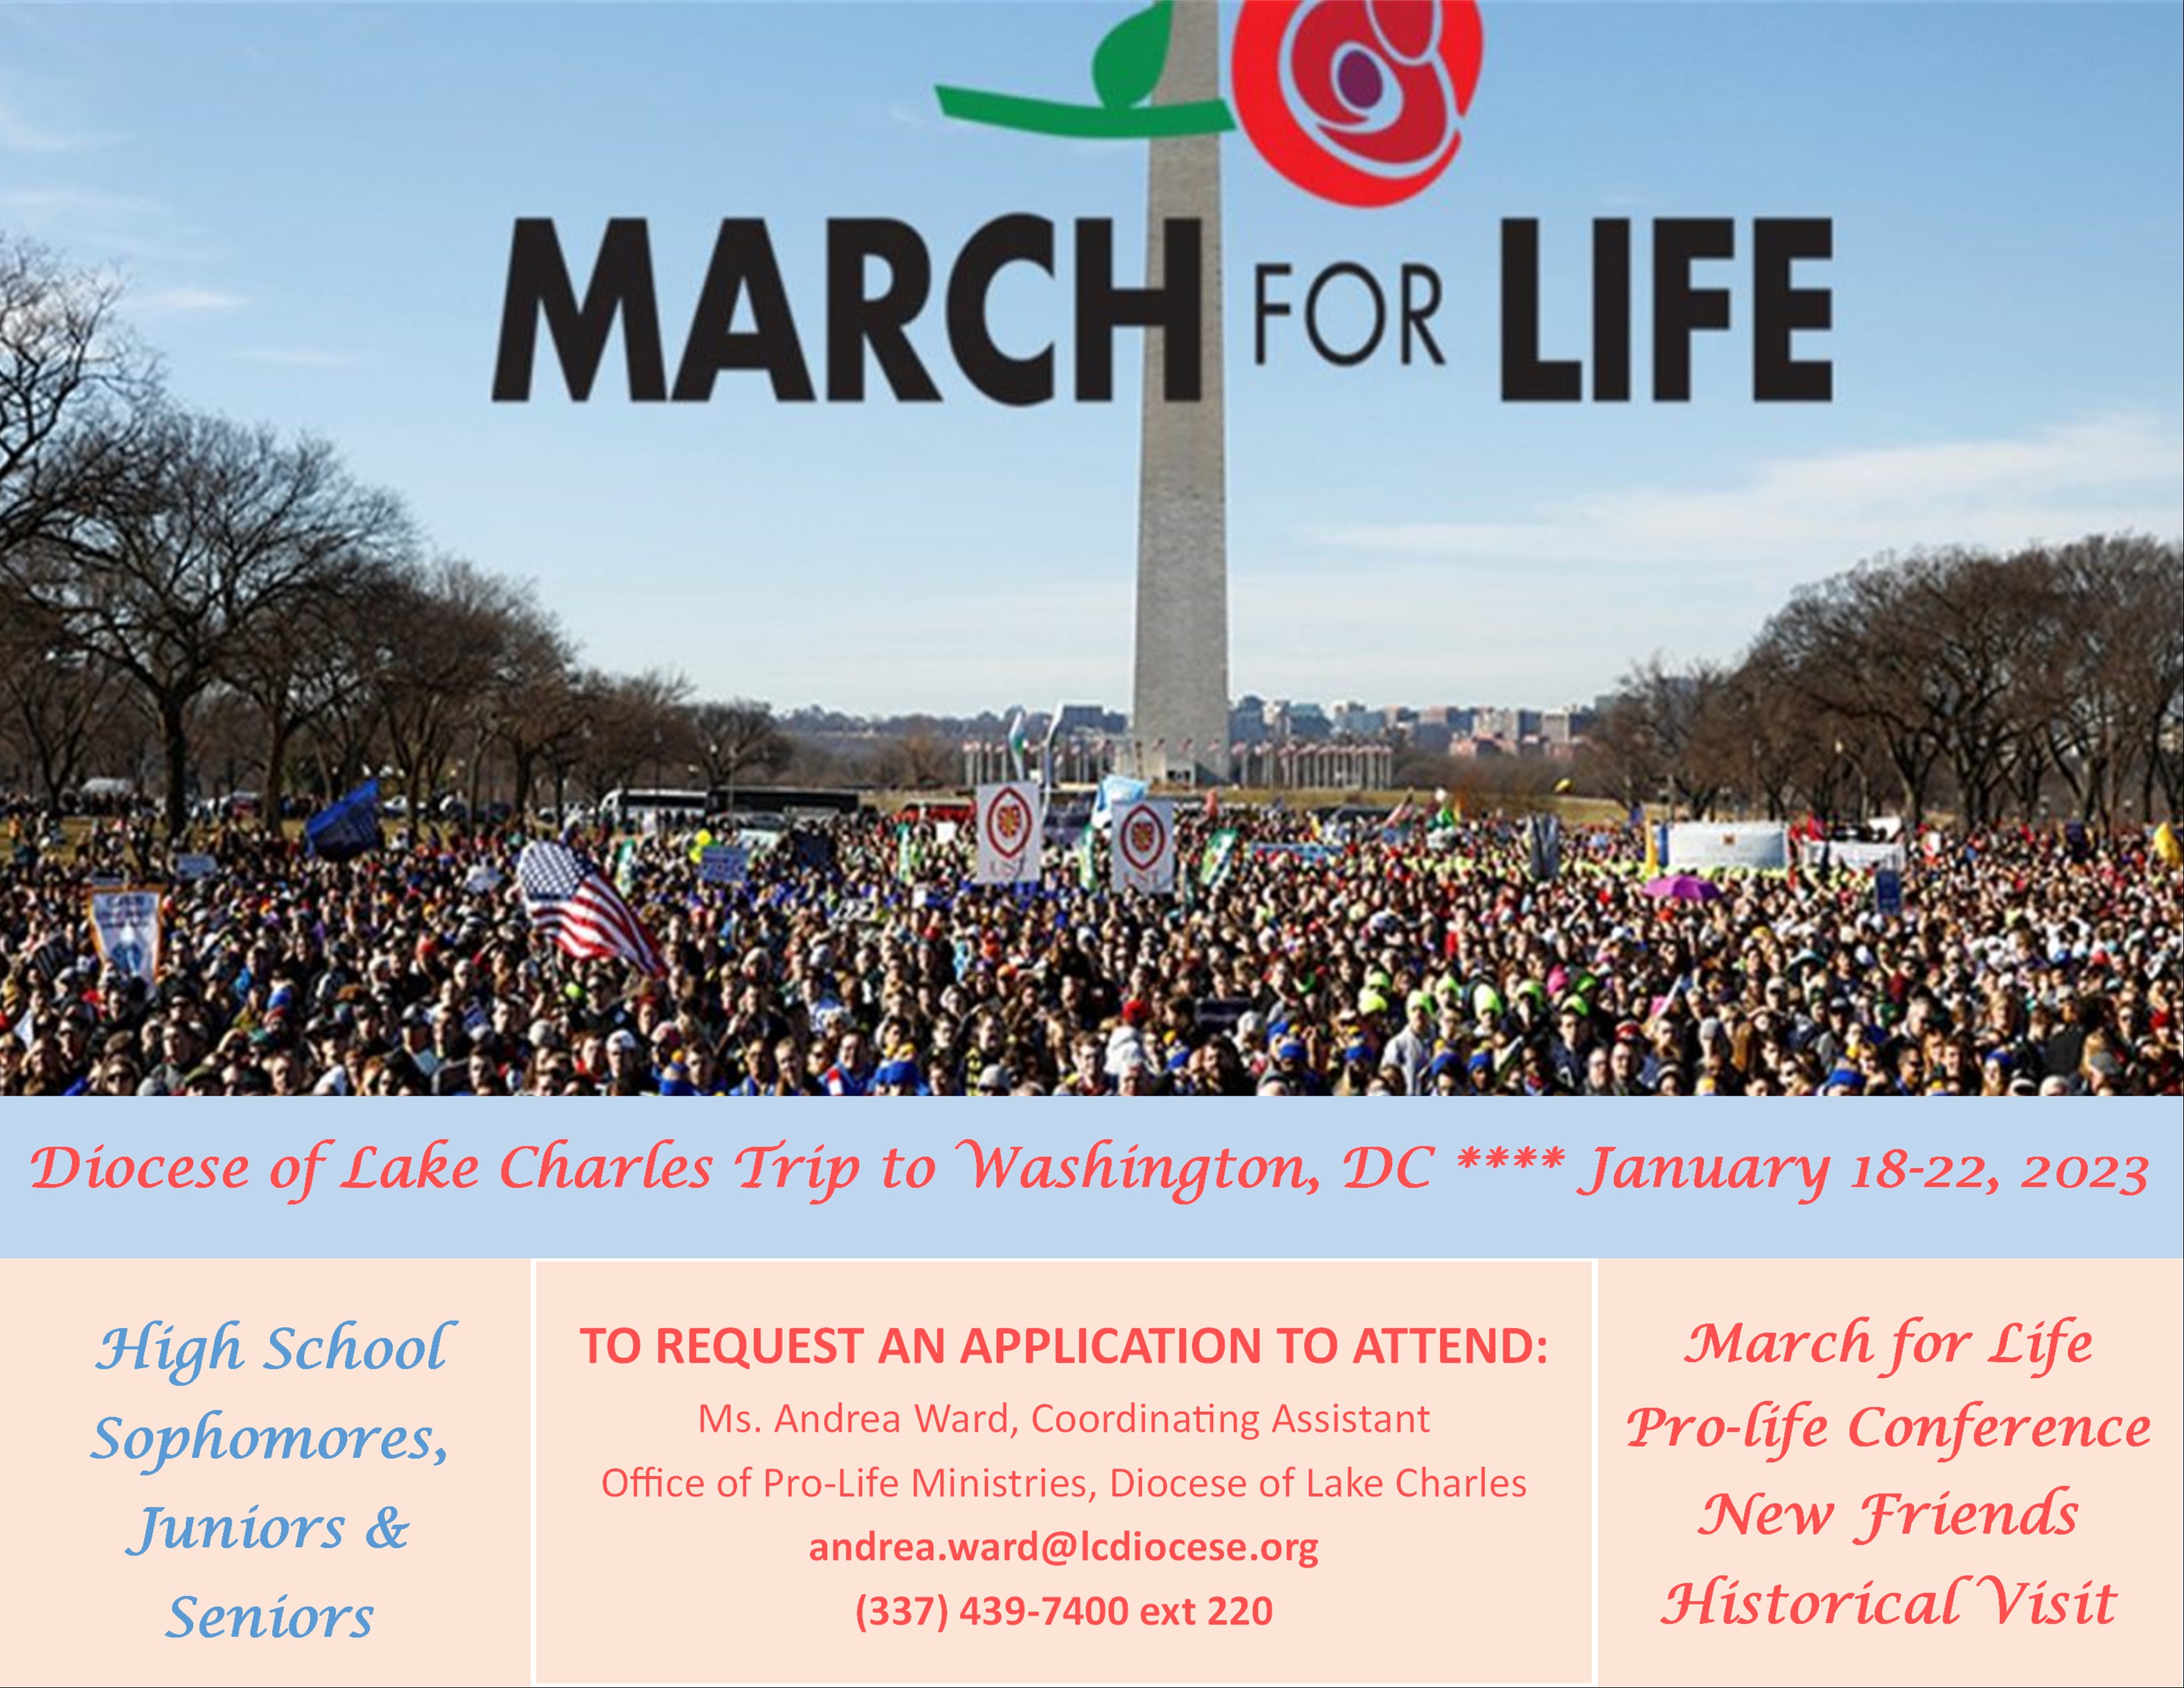 High Schoolers: March for Life Trip Planned in 2023 - Diocese of Lake Charles